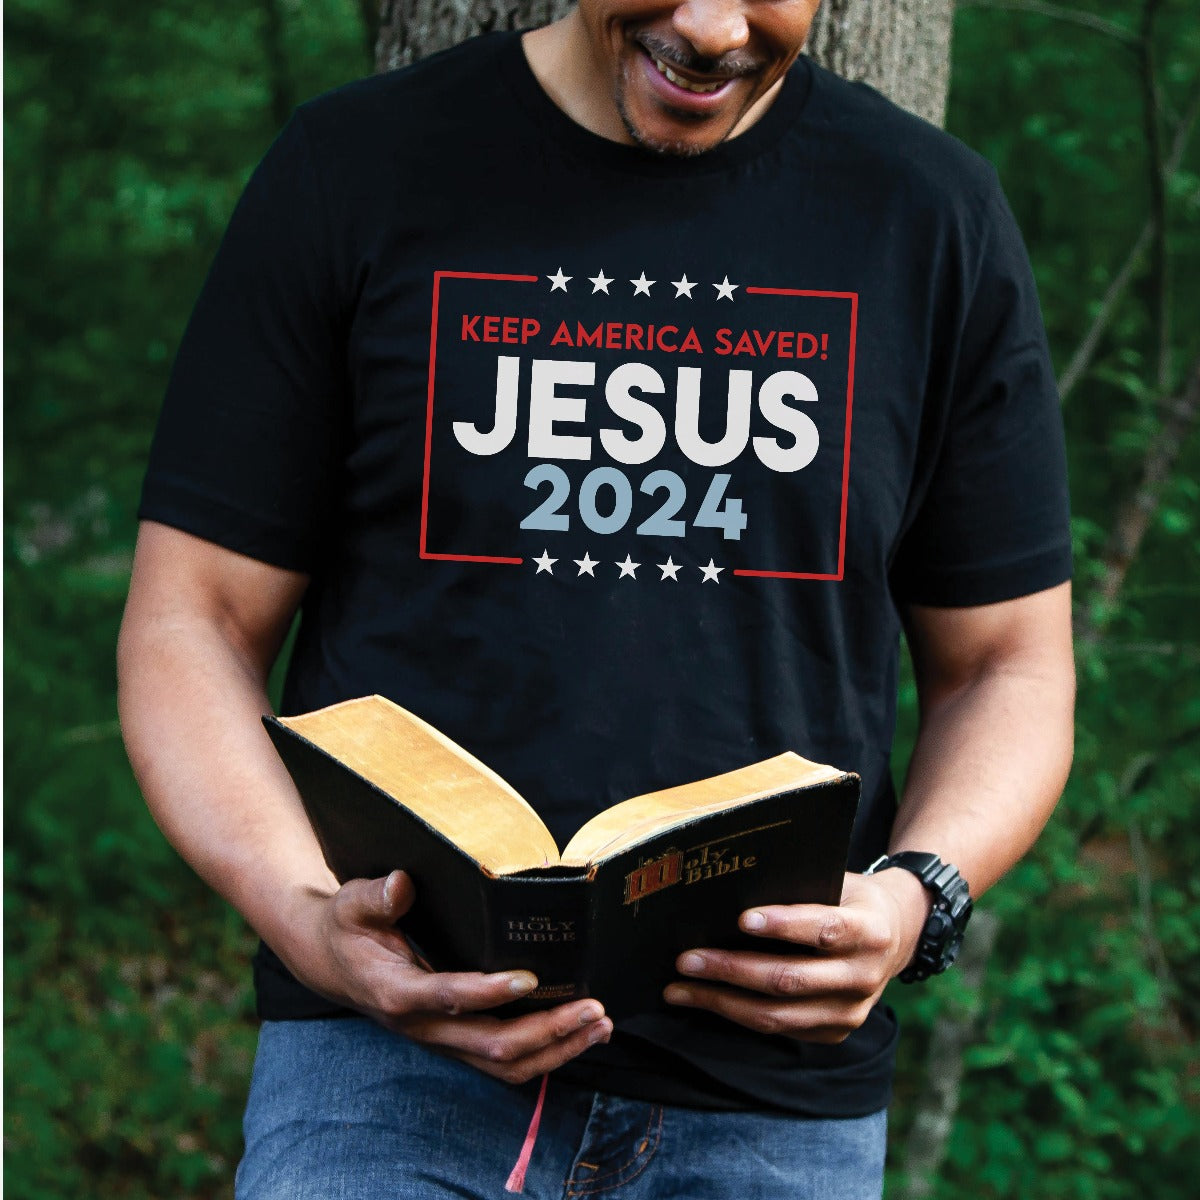 Patriotic man reading the bible wearing black Bella Canvas 3001 Presidential election vote unisex Christian t-shirt with "Jesus 2024 Keep America Saved" printed in bold red, white, and blue fonts, tees made in the USA for men and women God & Country Patriots